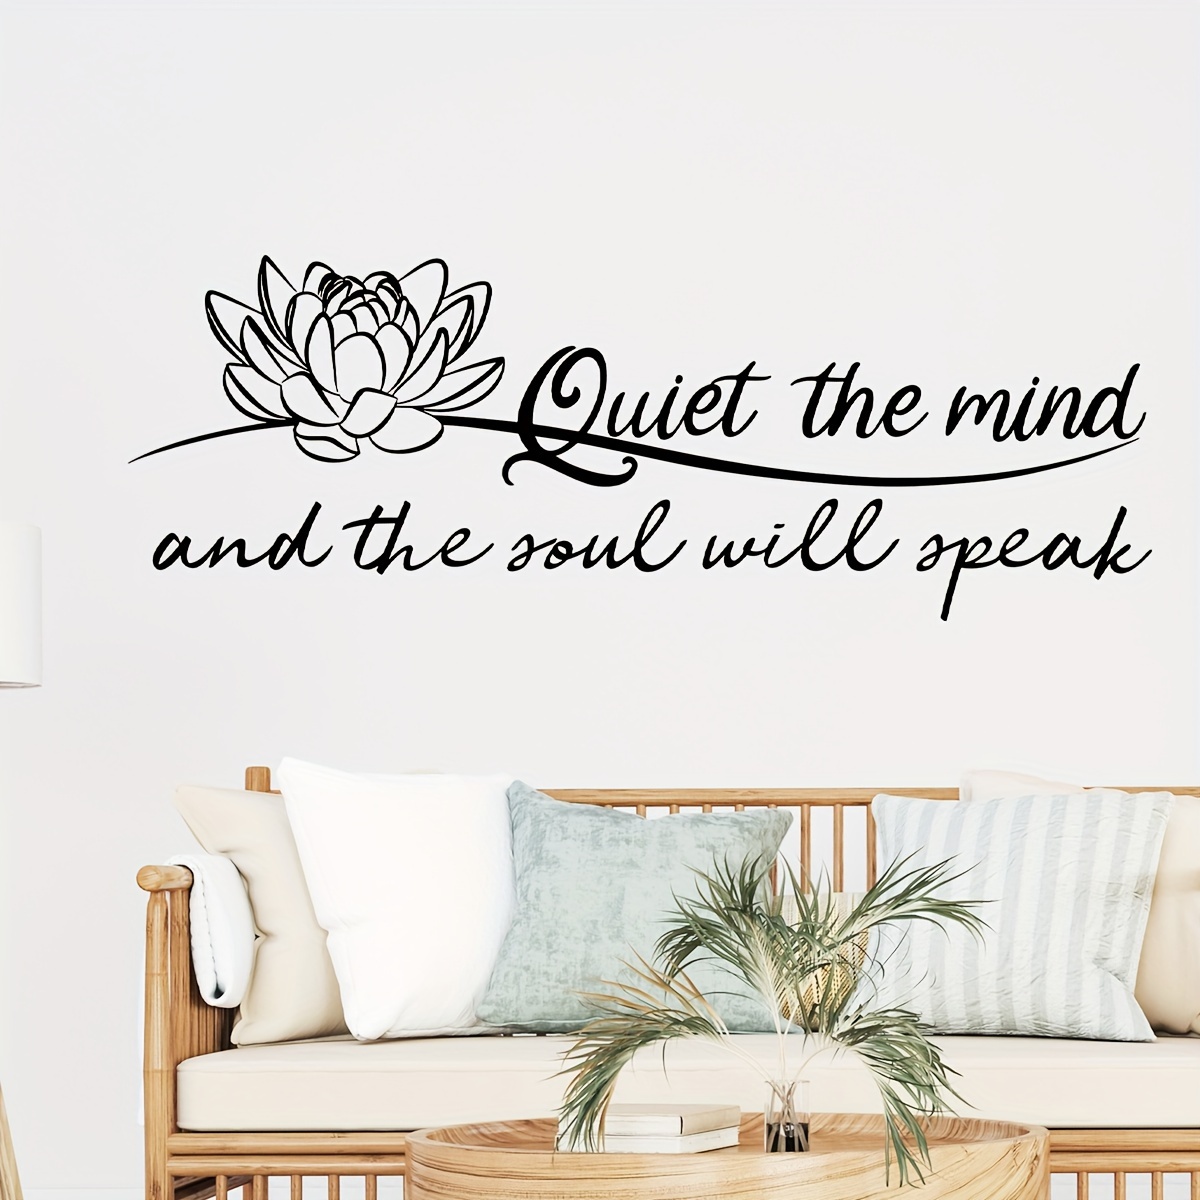 

1pc Creative Wall Sticker, English Inspirational Slogan Print, Waterproof Self-adhesive Wall Sticker For Bedroom, Entryway, Living Room, Porch, Home Decoration